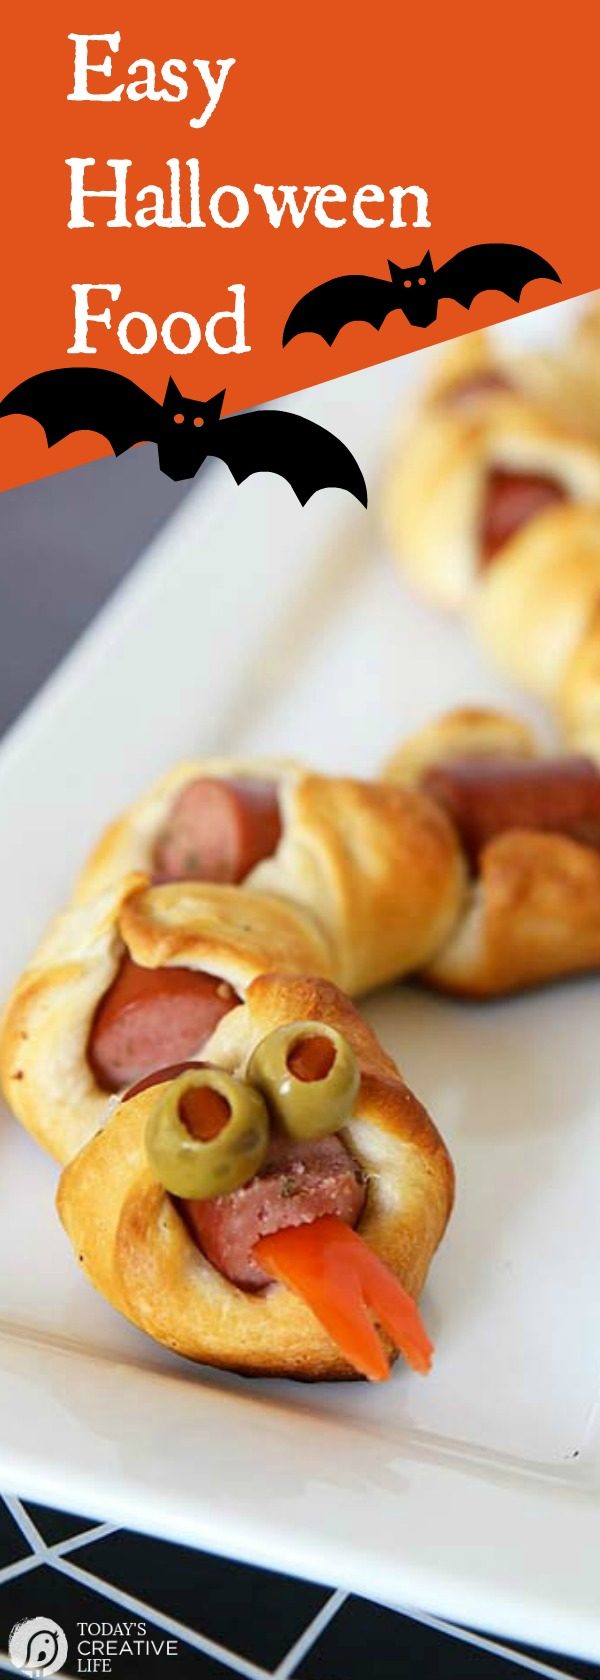 Easy Halloween Food | Rattlesnake Halloween Party Food | Easy to make scary food | Party Planning | Halloween Party | TodaysCreativeLIfe.com